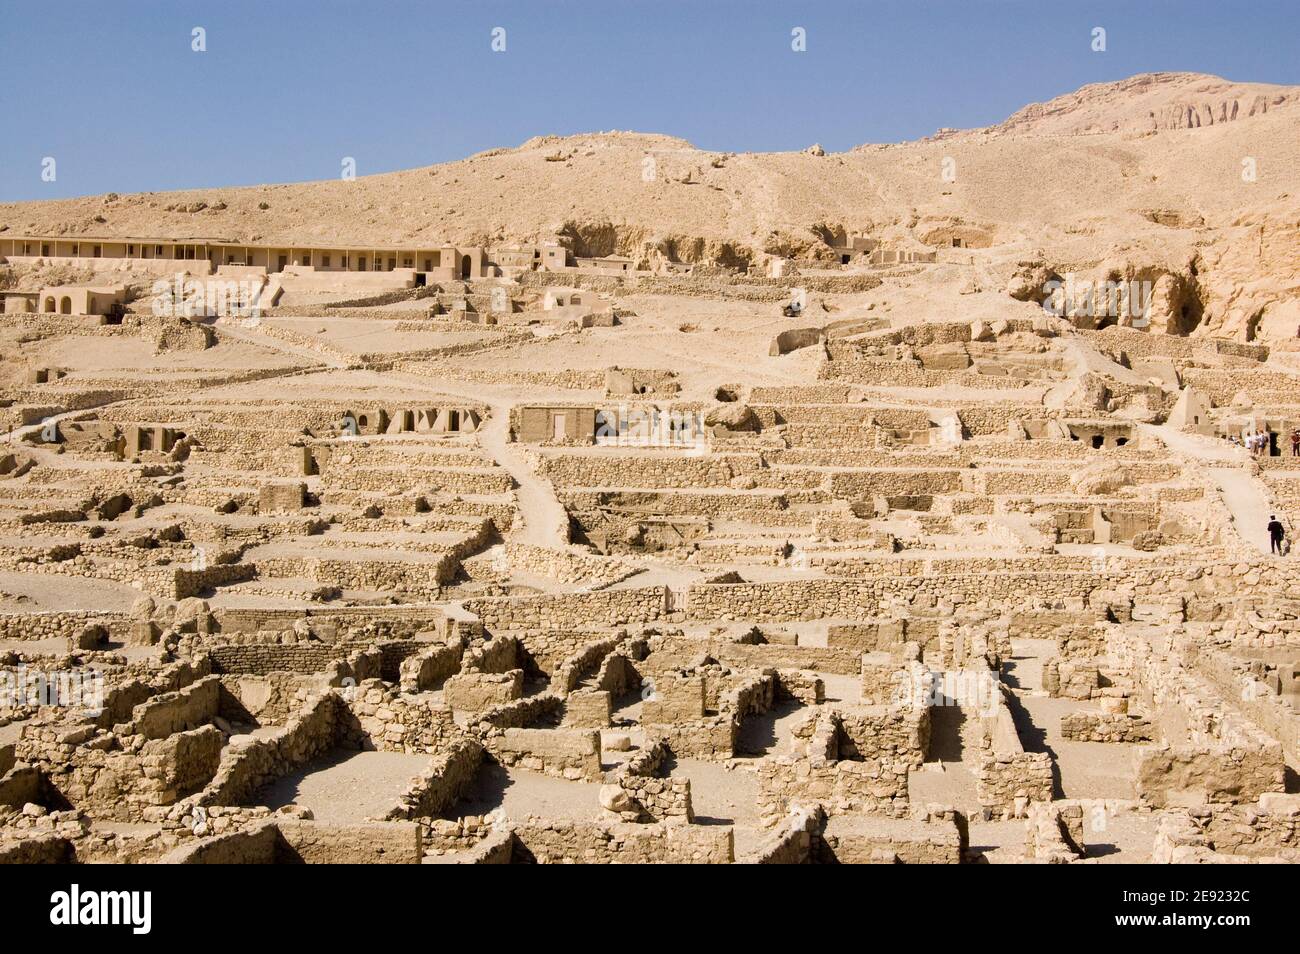 Ruined homes and tombs of the Ancient Egyptian town of Deir el Medina, Luxor, Egypt. Ruins over 1000 years old. Stock Photo